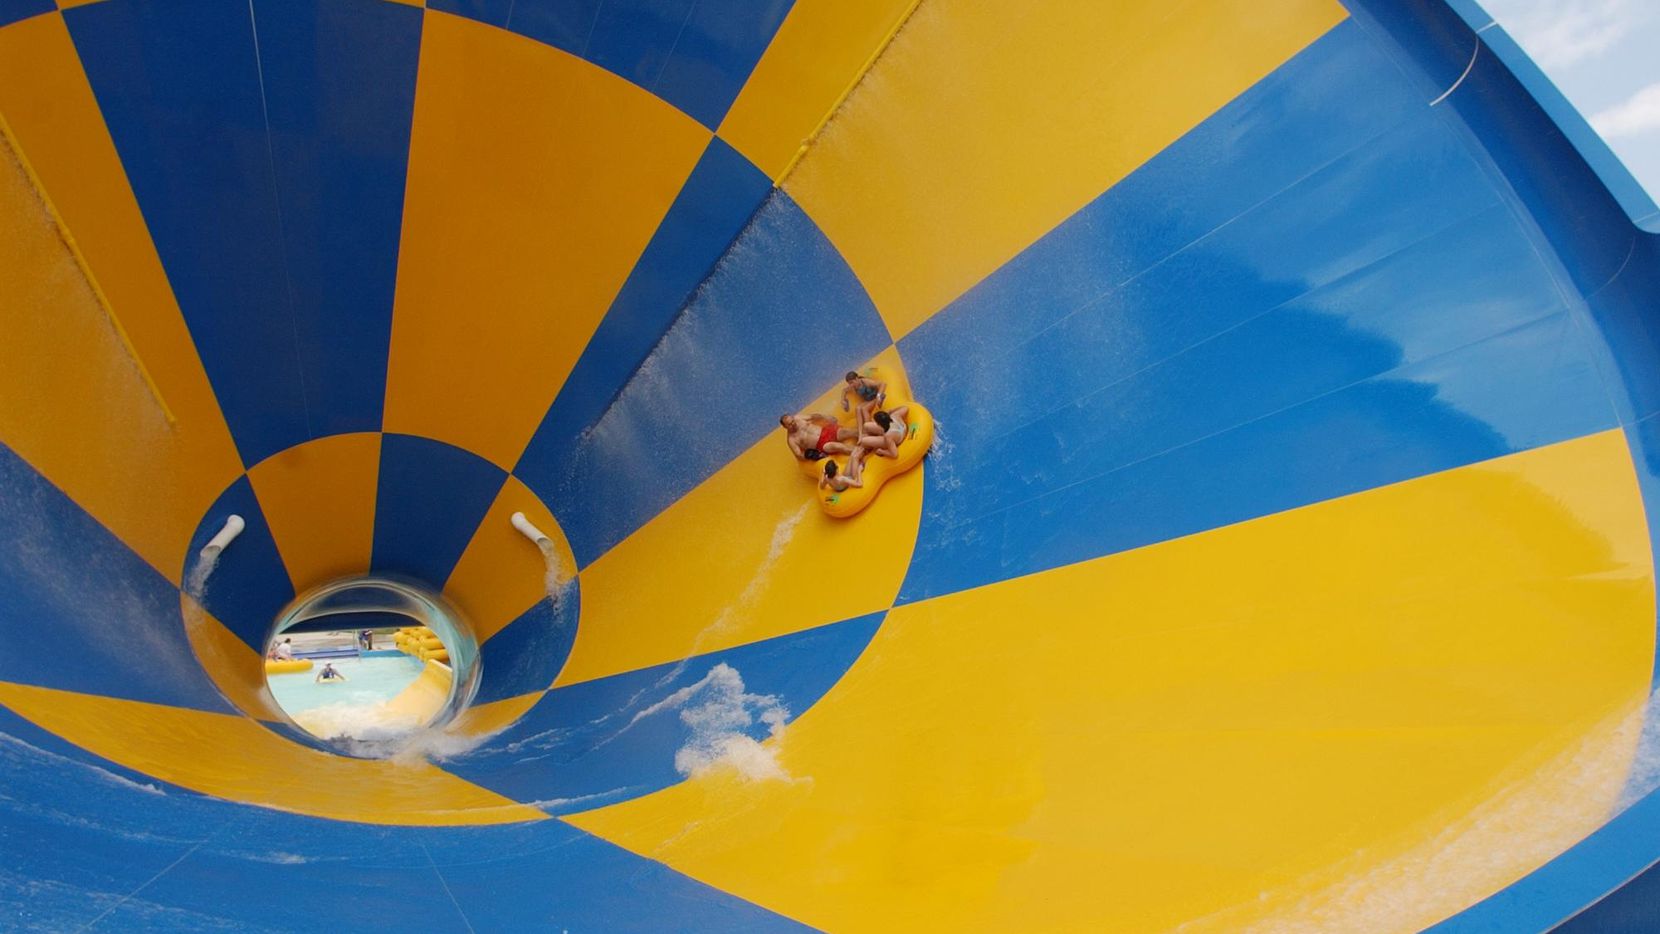 A group slides down the Tornado at Six Flags Hurricane Harbor in Arlington, the largest...